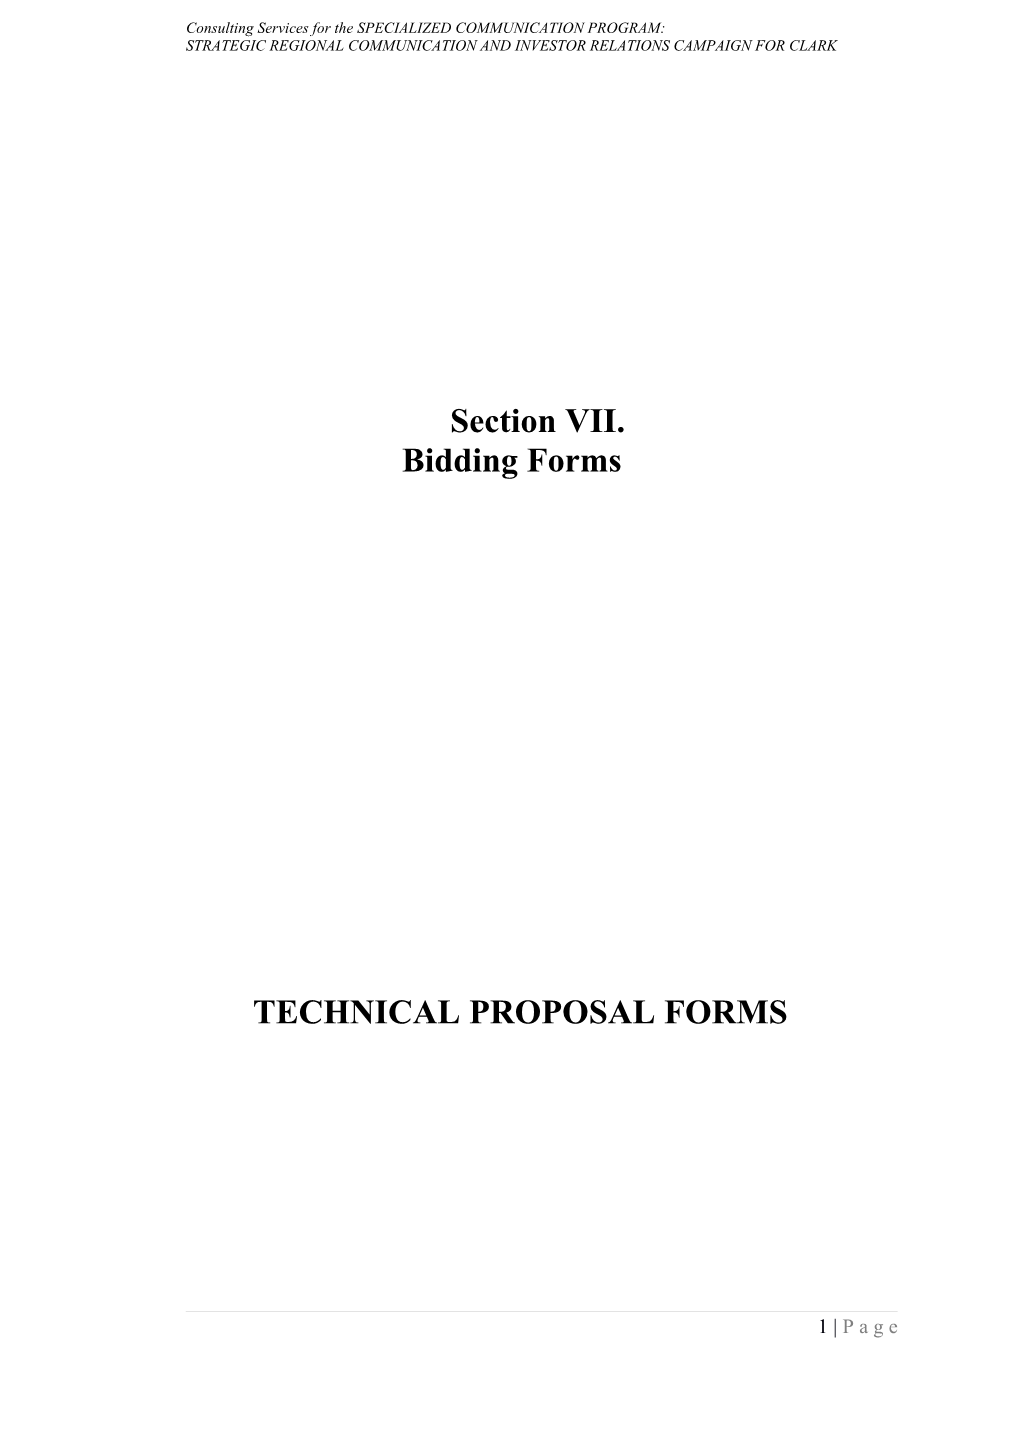 TPF 1. Technical Proposal Submission Form